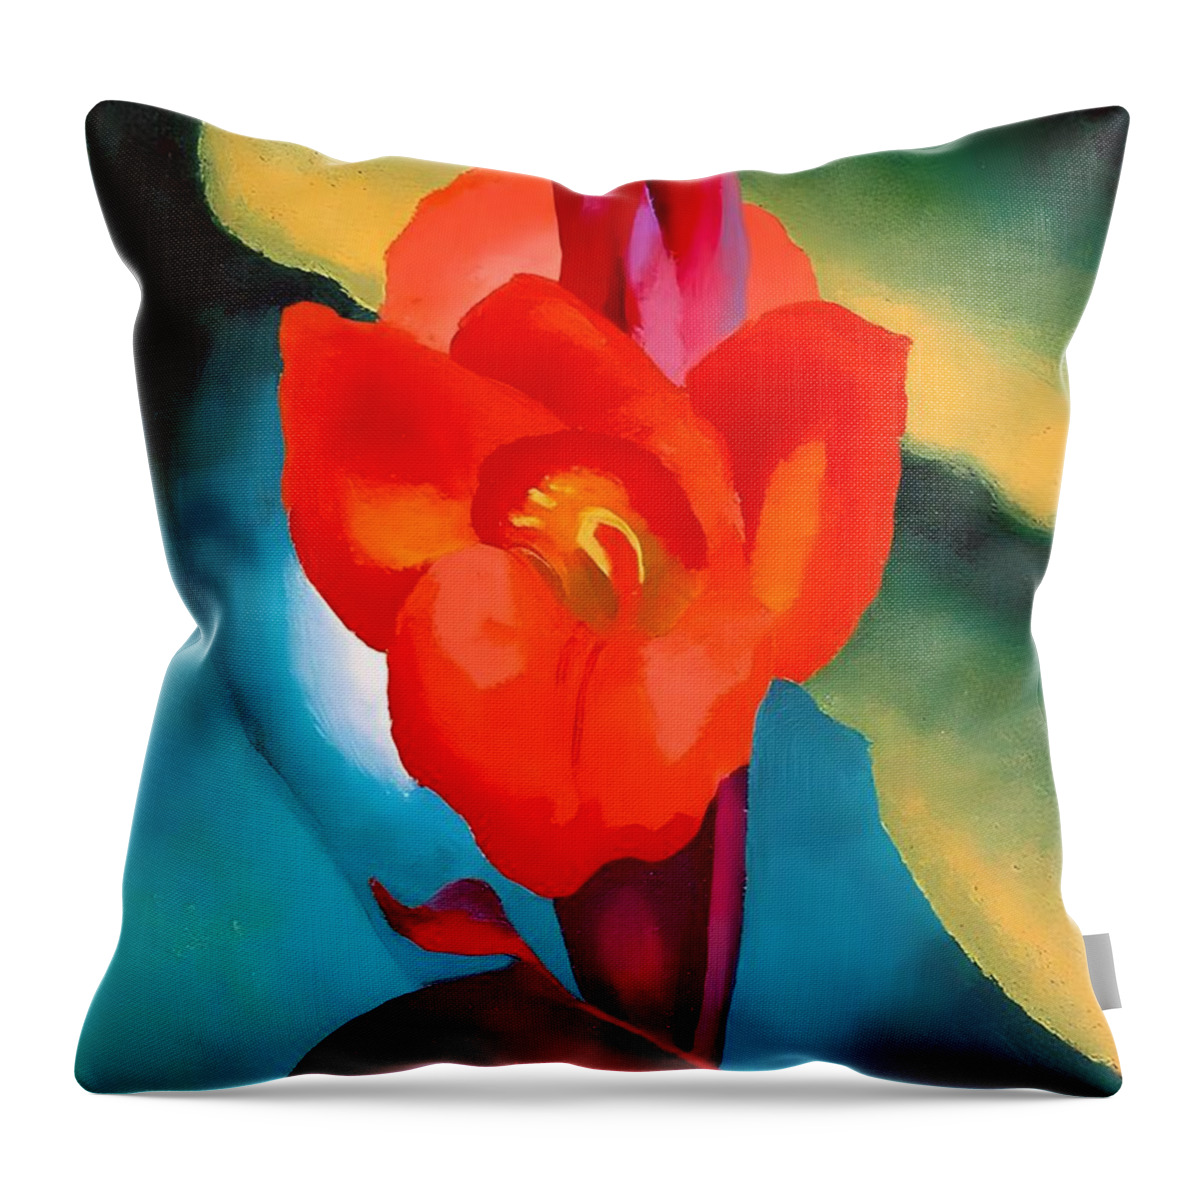  Red Canna Throw Pillow featuring the painting Red Canna, 1919 by Georgia O'Keeffe